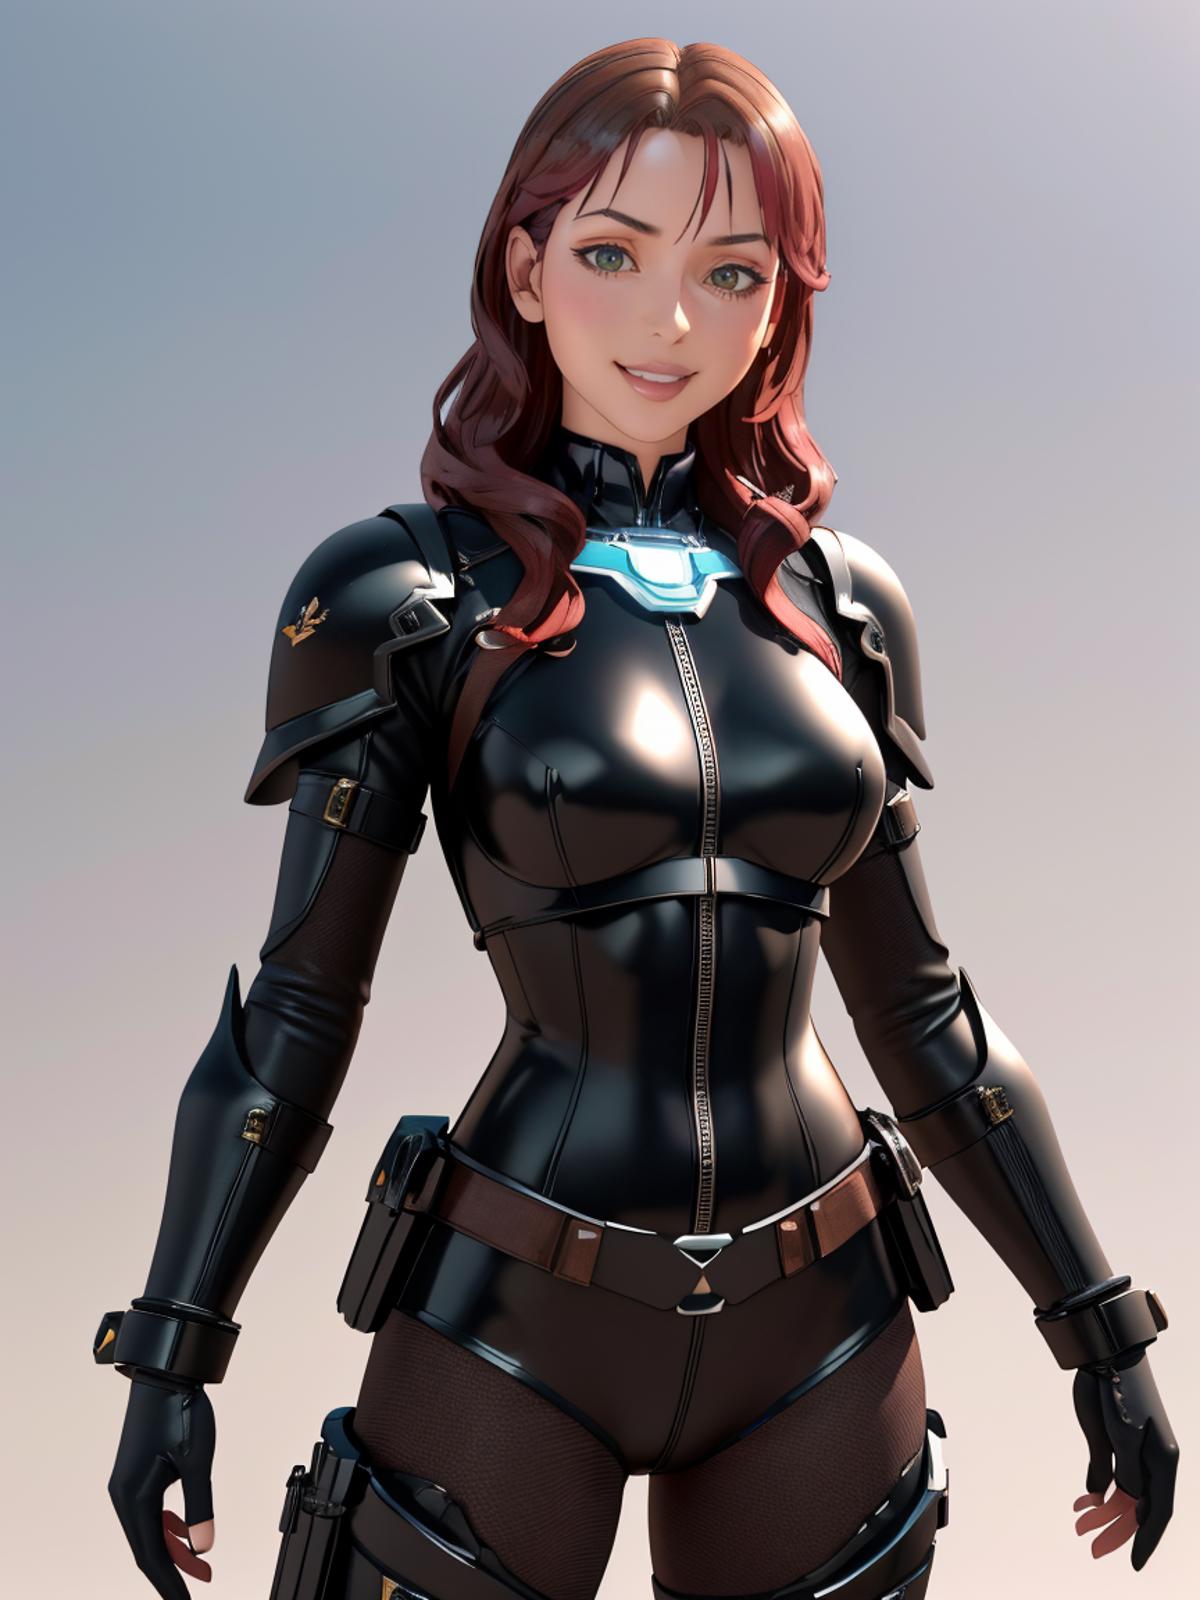 A computer generated image of a woman wearing a tight black bodysuit with a gun on her hip.